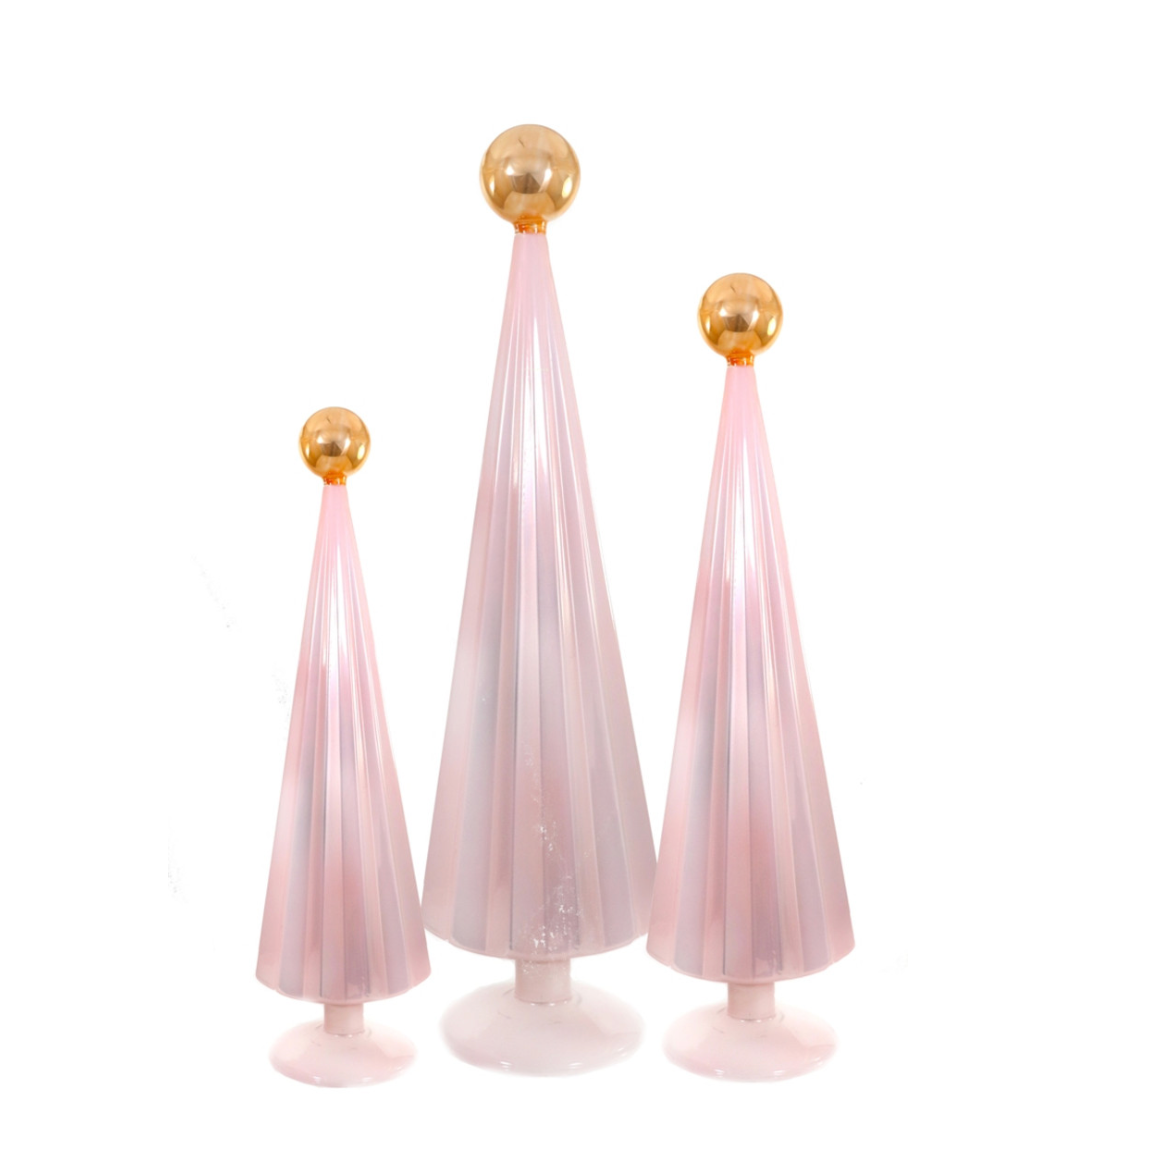 SET OF 3 PLEATED GLASS TREES LIGHT PINK/GOLD